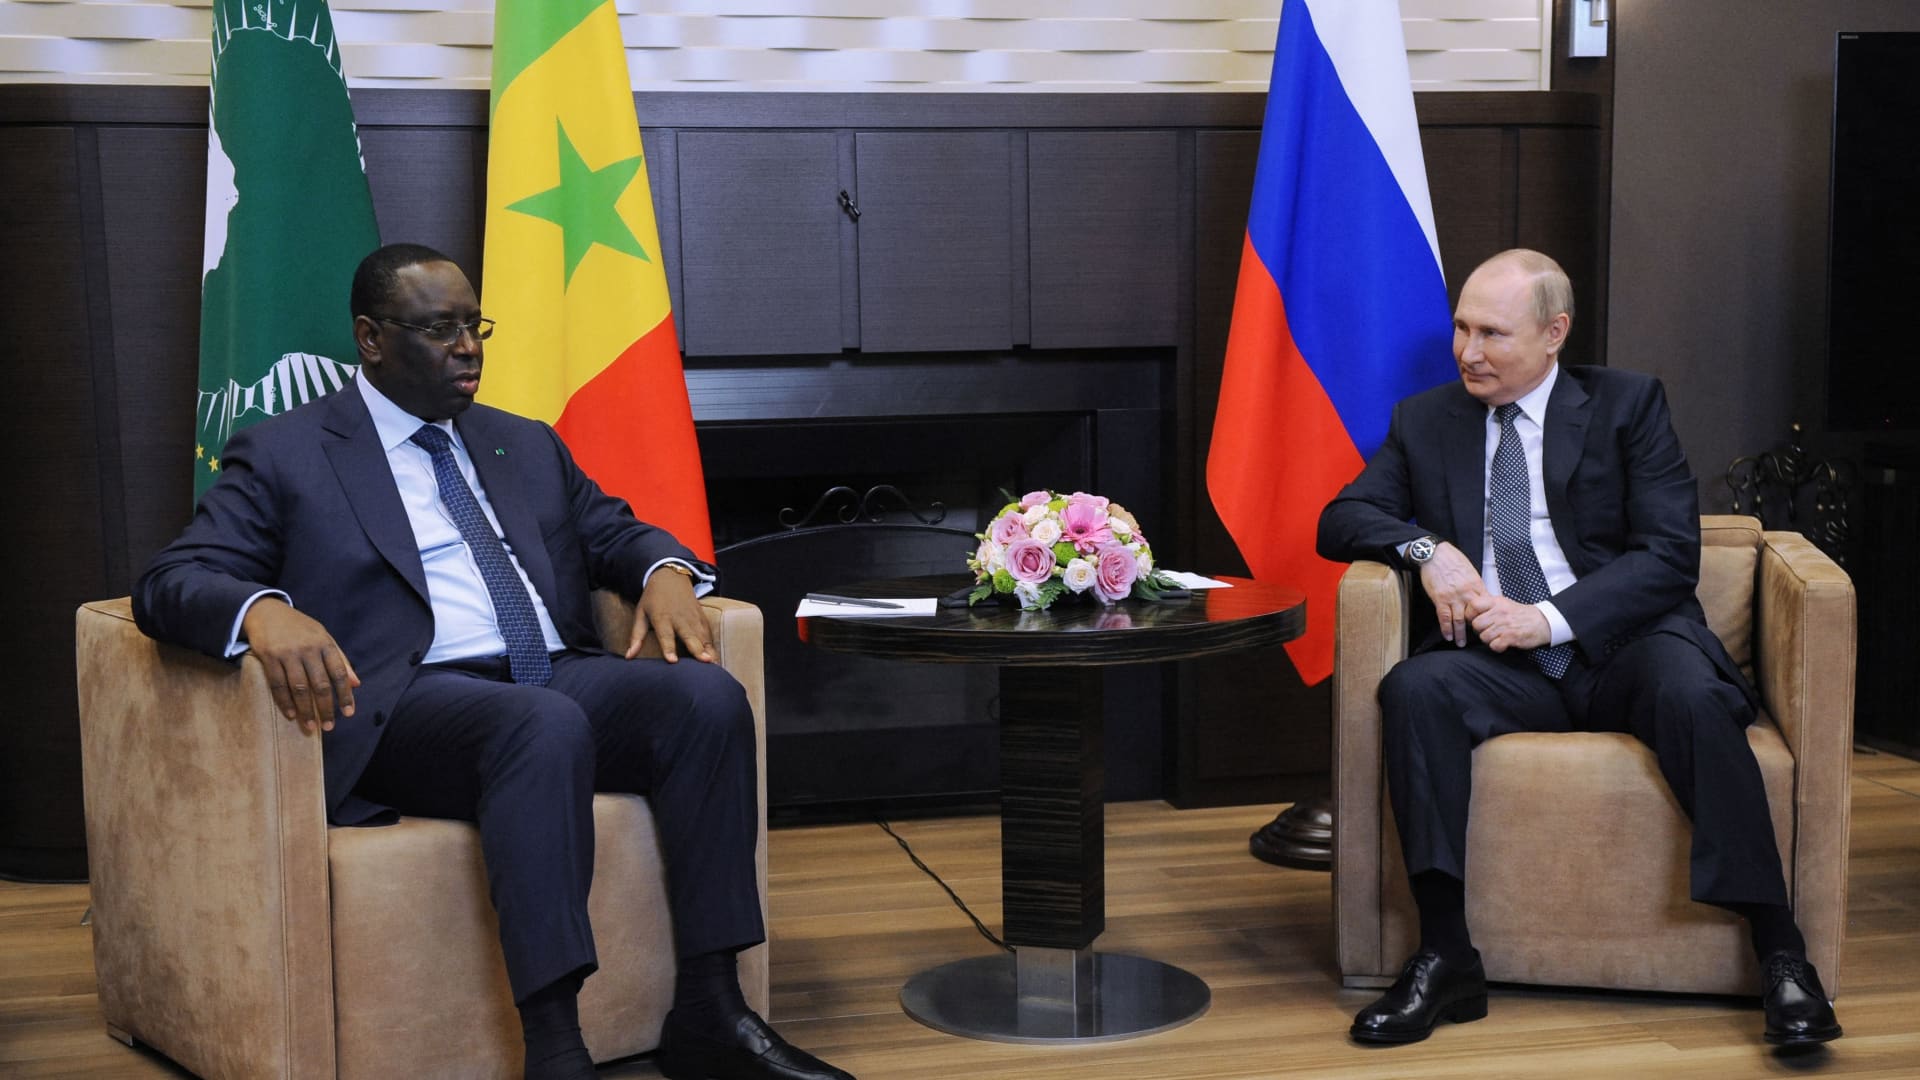 Russian President Vladimir Putin meets with Senegal's President and Chairperson of the African Union (AU) Macky Sall in Sochi on June 3, 2022.